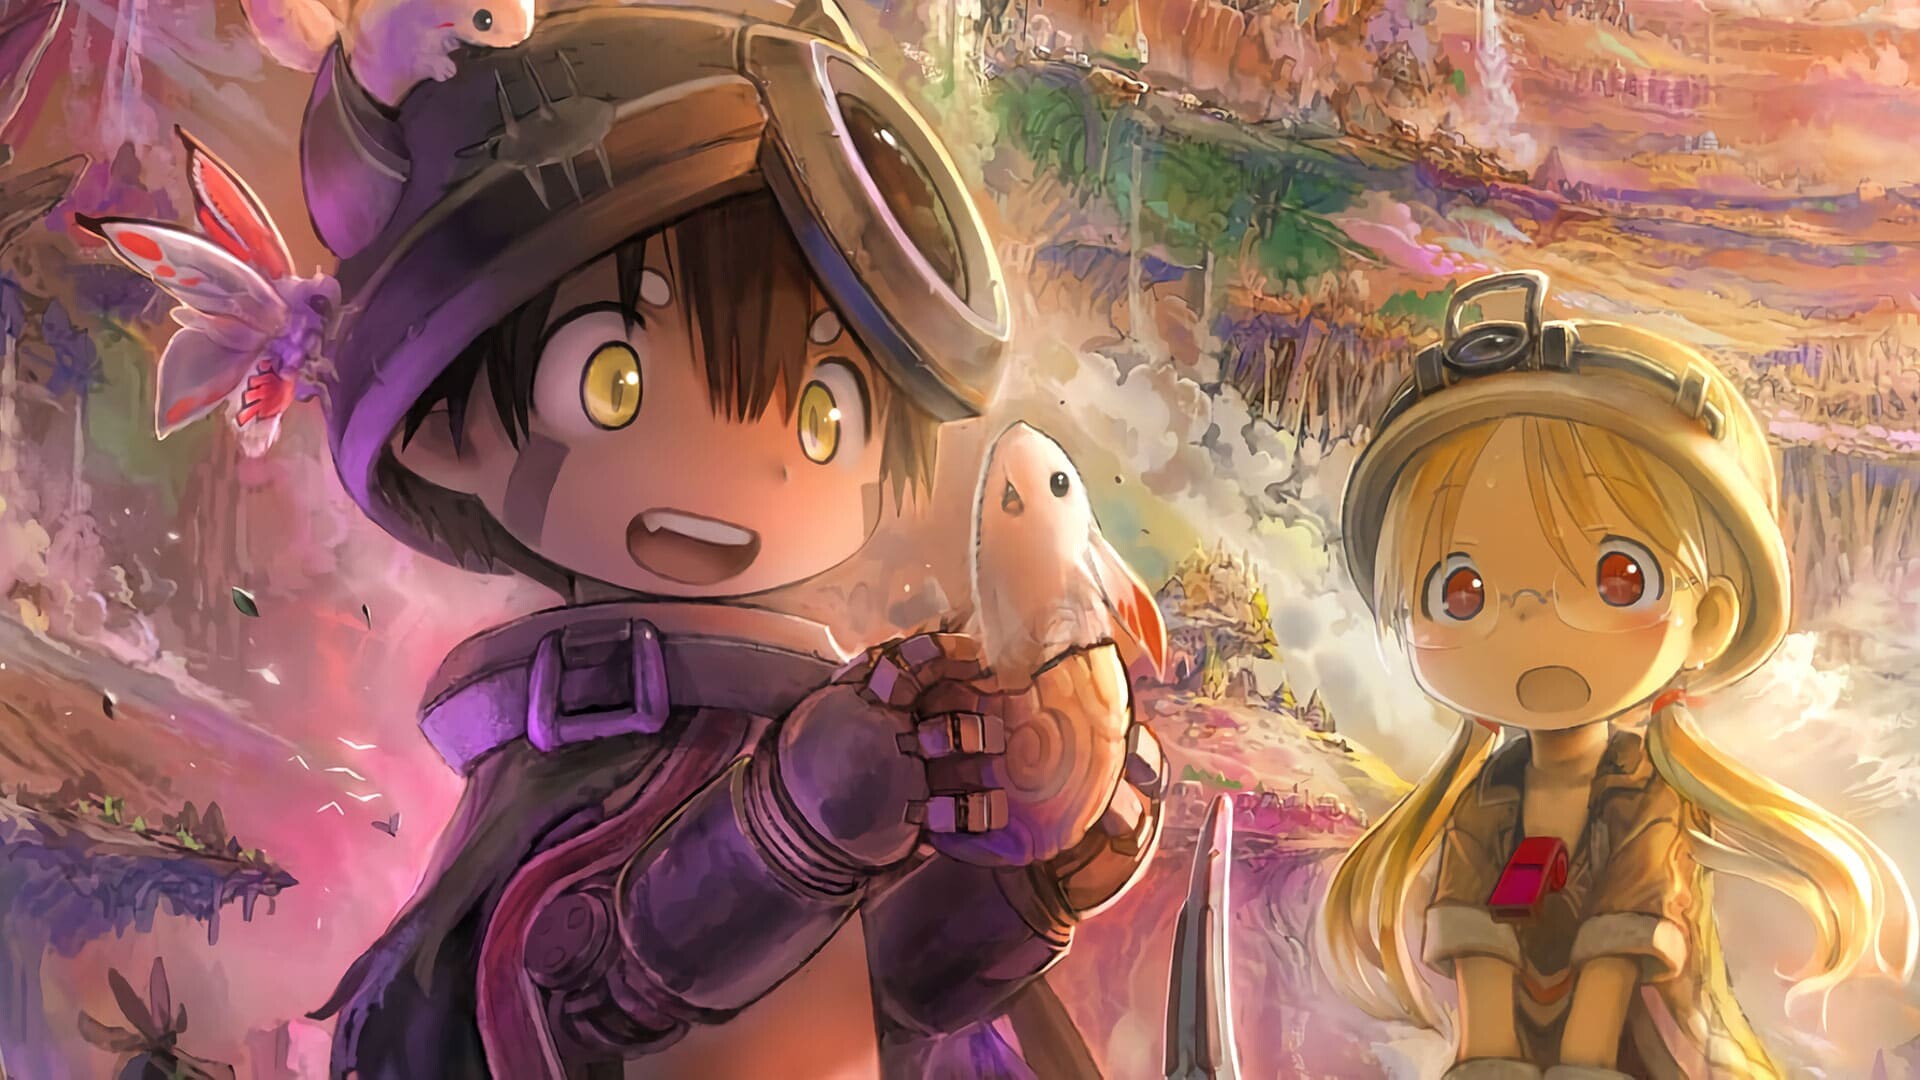 Made in Abyss: Dawn of the Deep Soul: Reg, sometimes referred to as "The Treasure of the Deep", Riko. 1920x1080 Full HD Background.